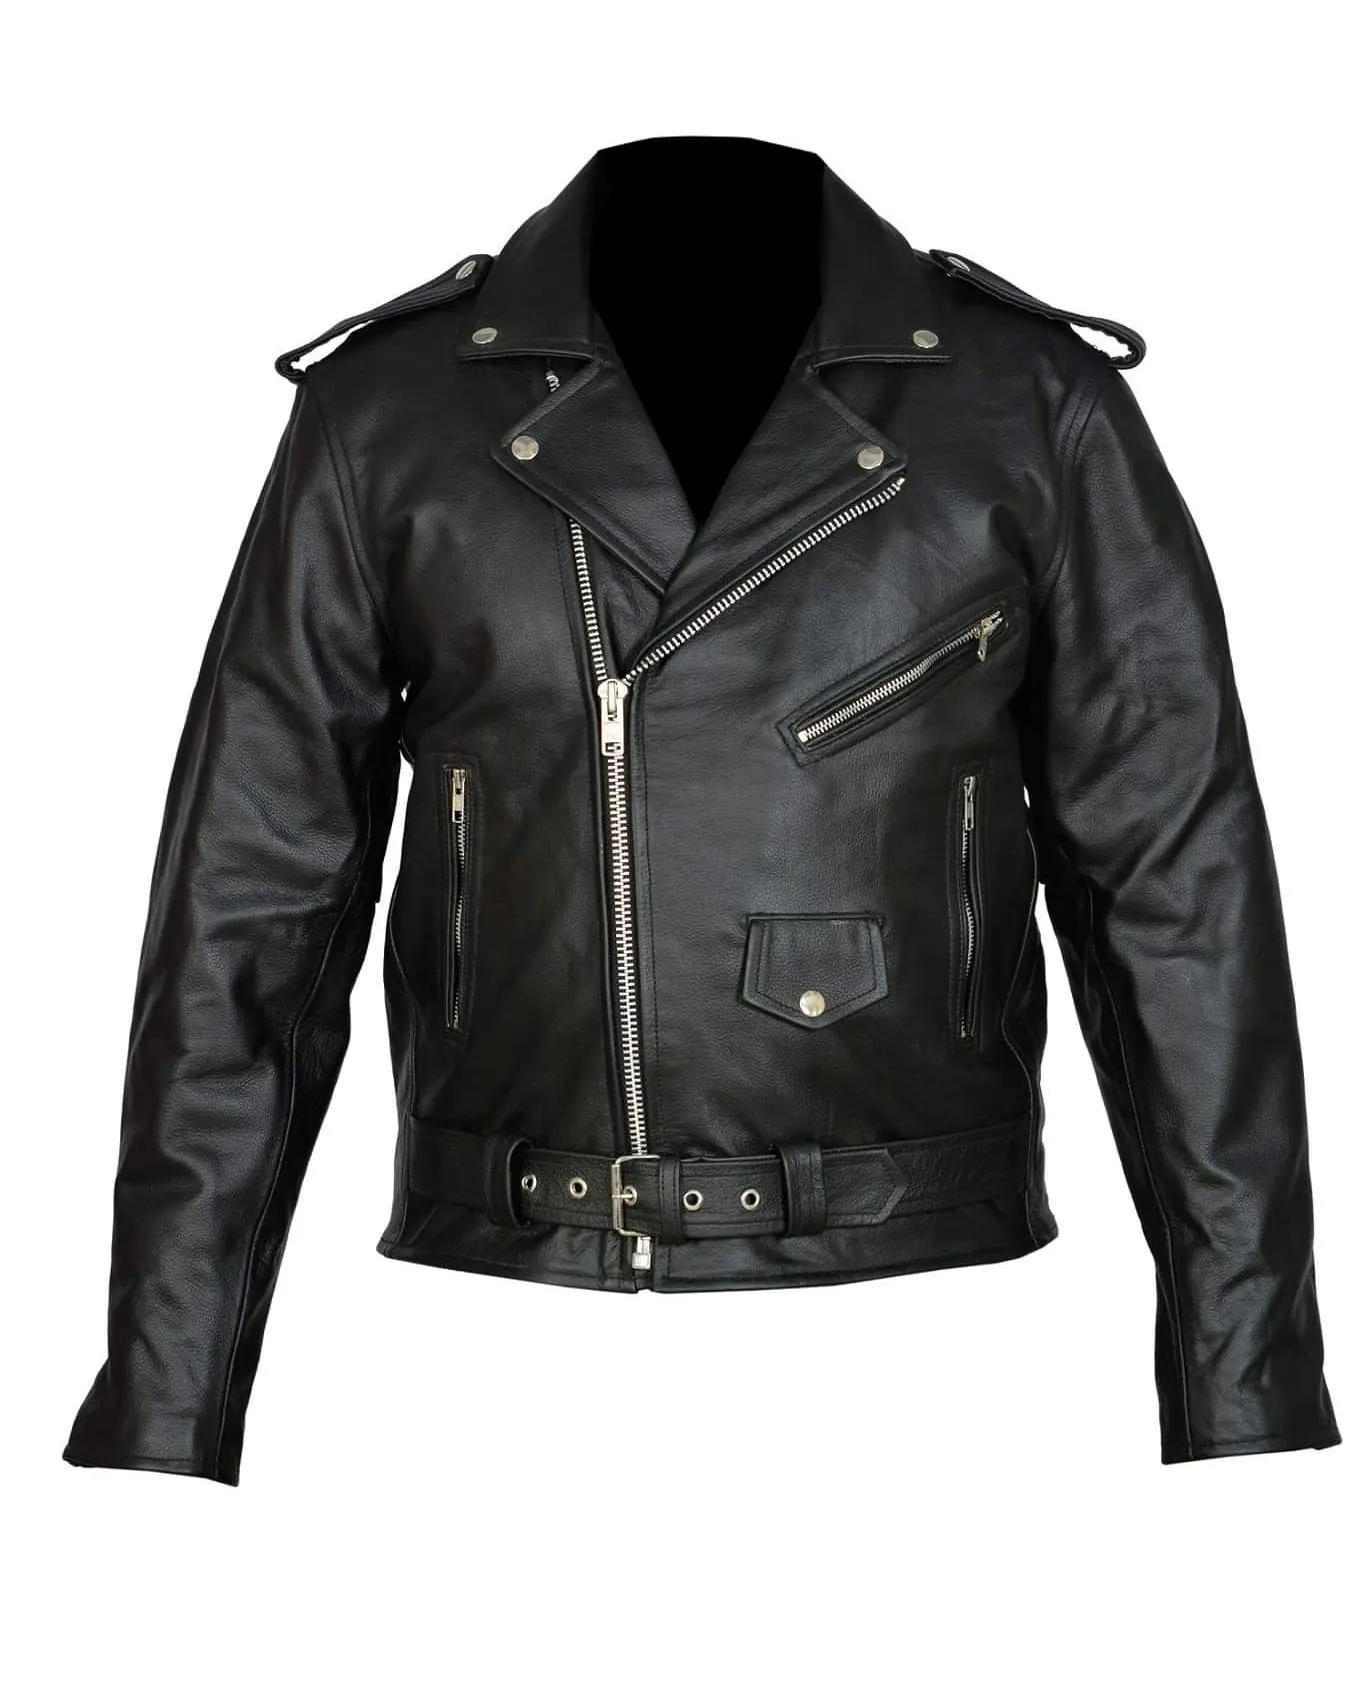 Latest Original Cowhide Natural Leather Motorcycle Cruiser Old American Style Fashion Jacket for Motorbike Riding and Cruising